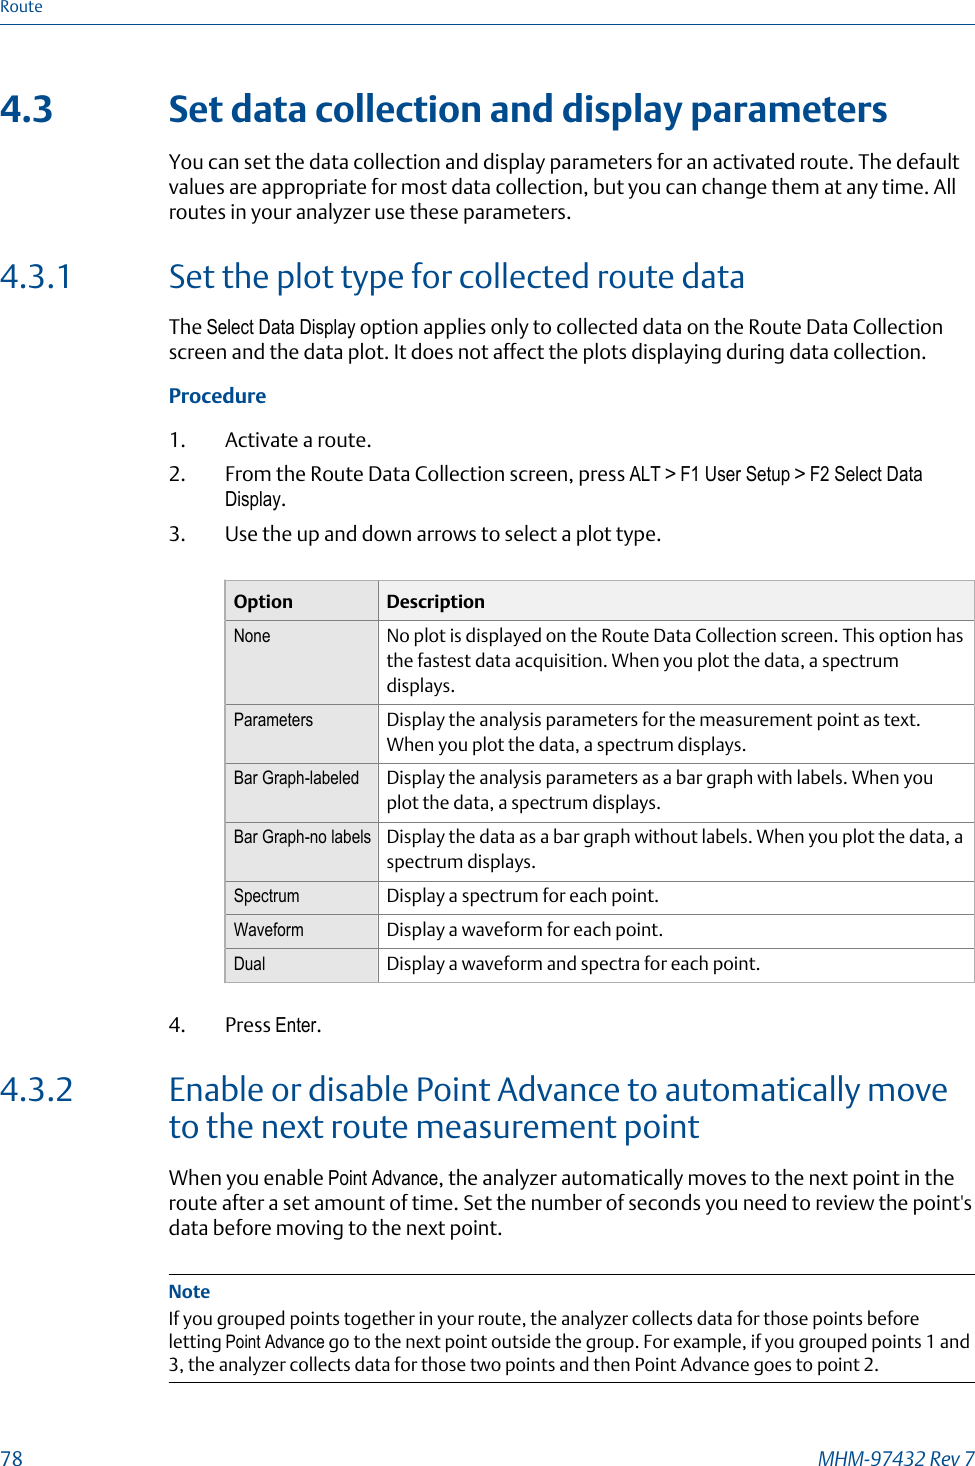 4.3 Set data collection and display parametersYou can set the data collection and display parameters for an activated route. The defaultvalues are appropriate for most data collection, but you can change them at any time. Allroutes in your analyzer use these parameters.4.3.1 Set the plot type for collected route dataThe Select Data Display option applies only to collected data on the Route Data Collectionscreen and the data plot. It does not affect the plots displaying during data collection.Procedure1. Activate a route.2. From the Route Data Collection screen, press ALT &gt; F1 User Setup &gt; F2 Select DataDisplay.3. Use the up and down arrows to select a plot type.Option DescriptionNone No plot is displayed on the Route Data Collection screen. This option hasthe fastest data acquisition. When you plot the data, a spectrumdisplays.Parameters Display the analysis parameters for the measurement point as text.When you plot the data, a spectrum displays.Bar Graph-labeled Display the analysis parameters as a bar graph with labels. When youplot the data, a spectrum displays.Bar Graph-no labels Display the data as a bar graph without labels. When you plot the data, aspectrum displays.Spectrum Display a spectrum for each point.Waveform Display a waveform for each point.Dual Display a waveform and spectra for each point.4. Press Enter.4.3.2 Enable or disable Point Advance to automatically moveto the next route measurement pointWhen you enable Point Advance, the analyzer automatically moves to the next point in theroute after a set amount of time. Set the number of seconds you need to review the point&apos;sdata before moving to the next point.NoteIf you grouped points together in your route, the analyzer collects data for those points beforeletting Point Advance go to the next point outside the group. For example, if you grouped points 1 and3, the analyzer collects data for those two points and then Point Advance goes to point 2.Route78 MHM-97432 Rev 7